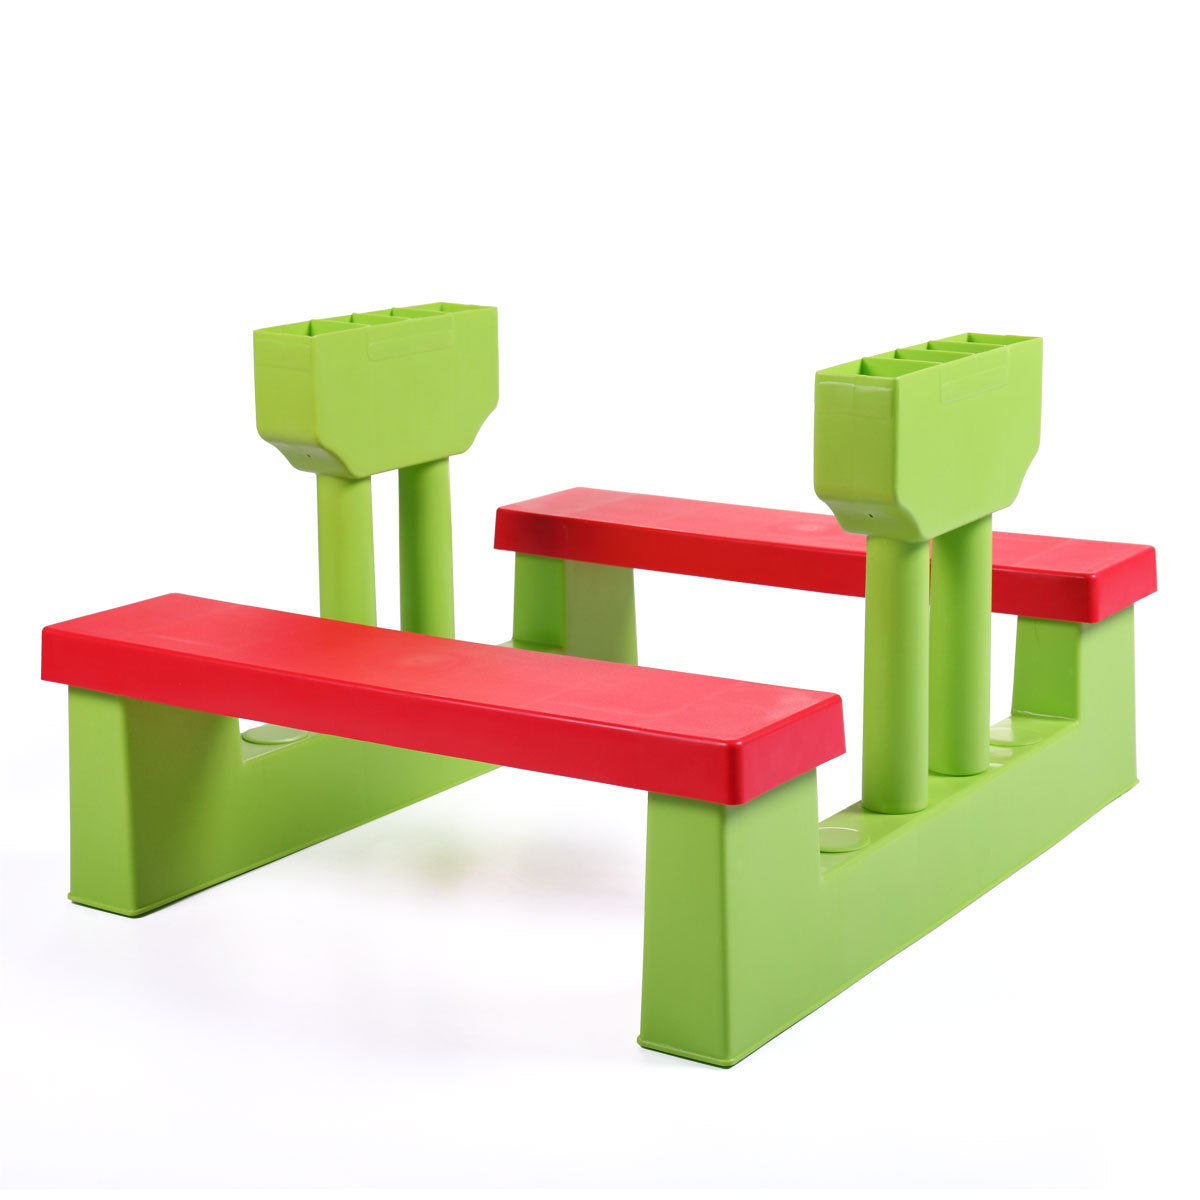 Kid Outdoor Picnic Table Set with Removable and Foldable Umbrella